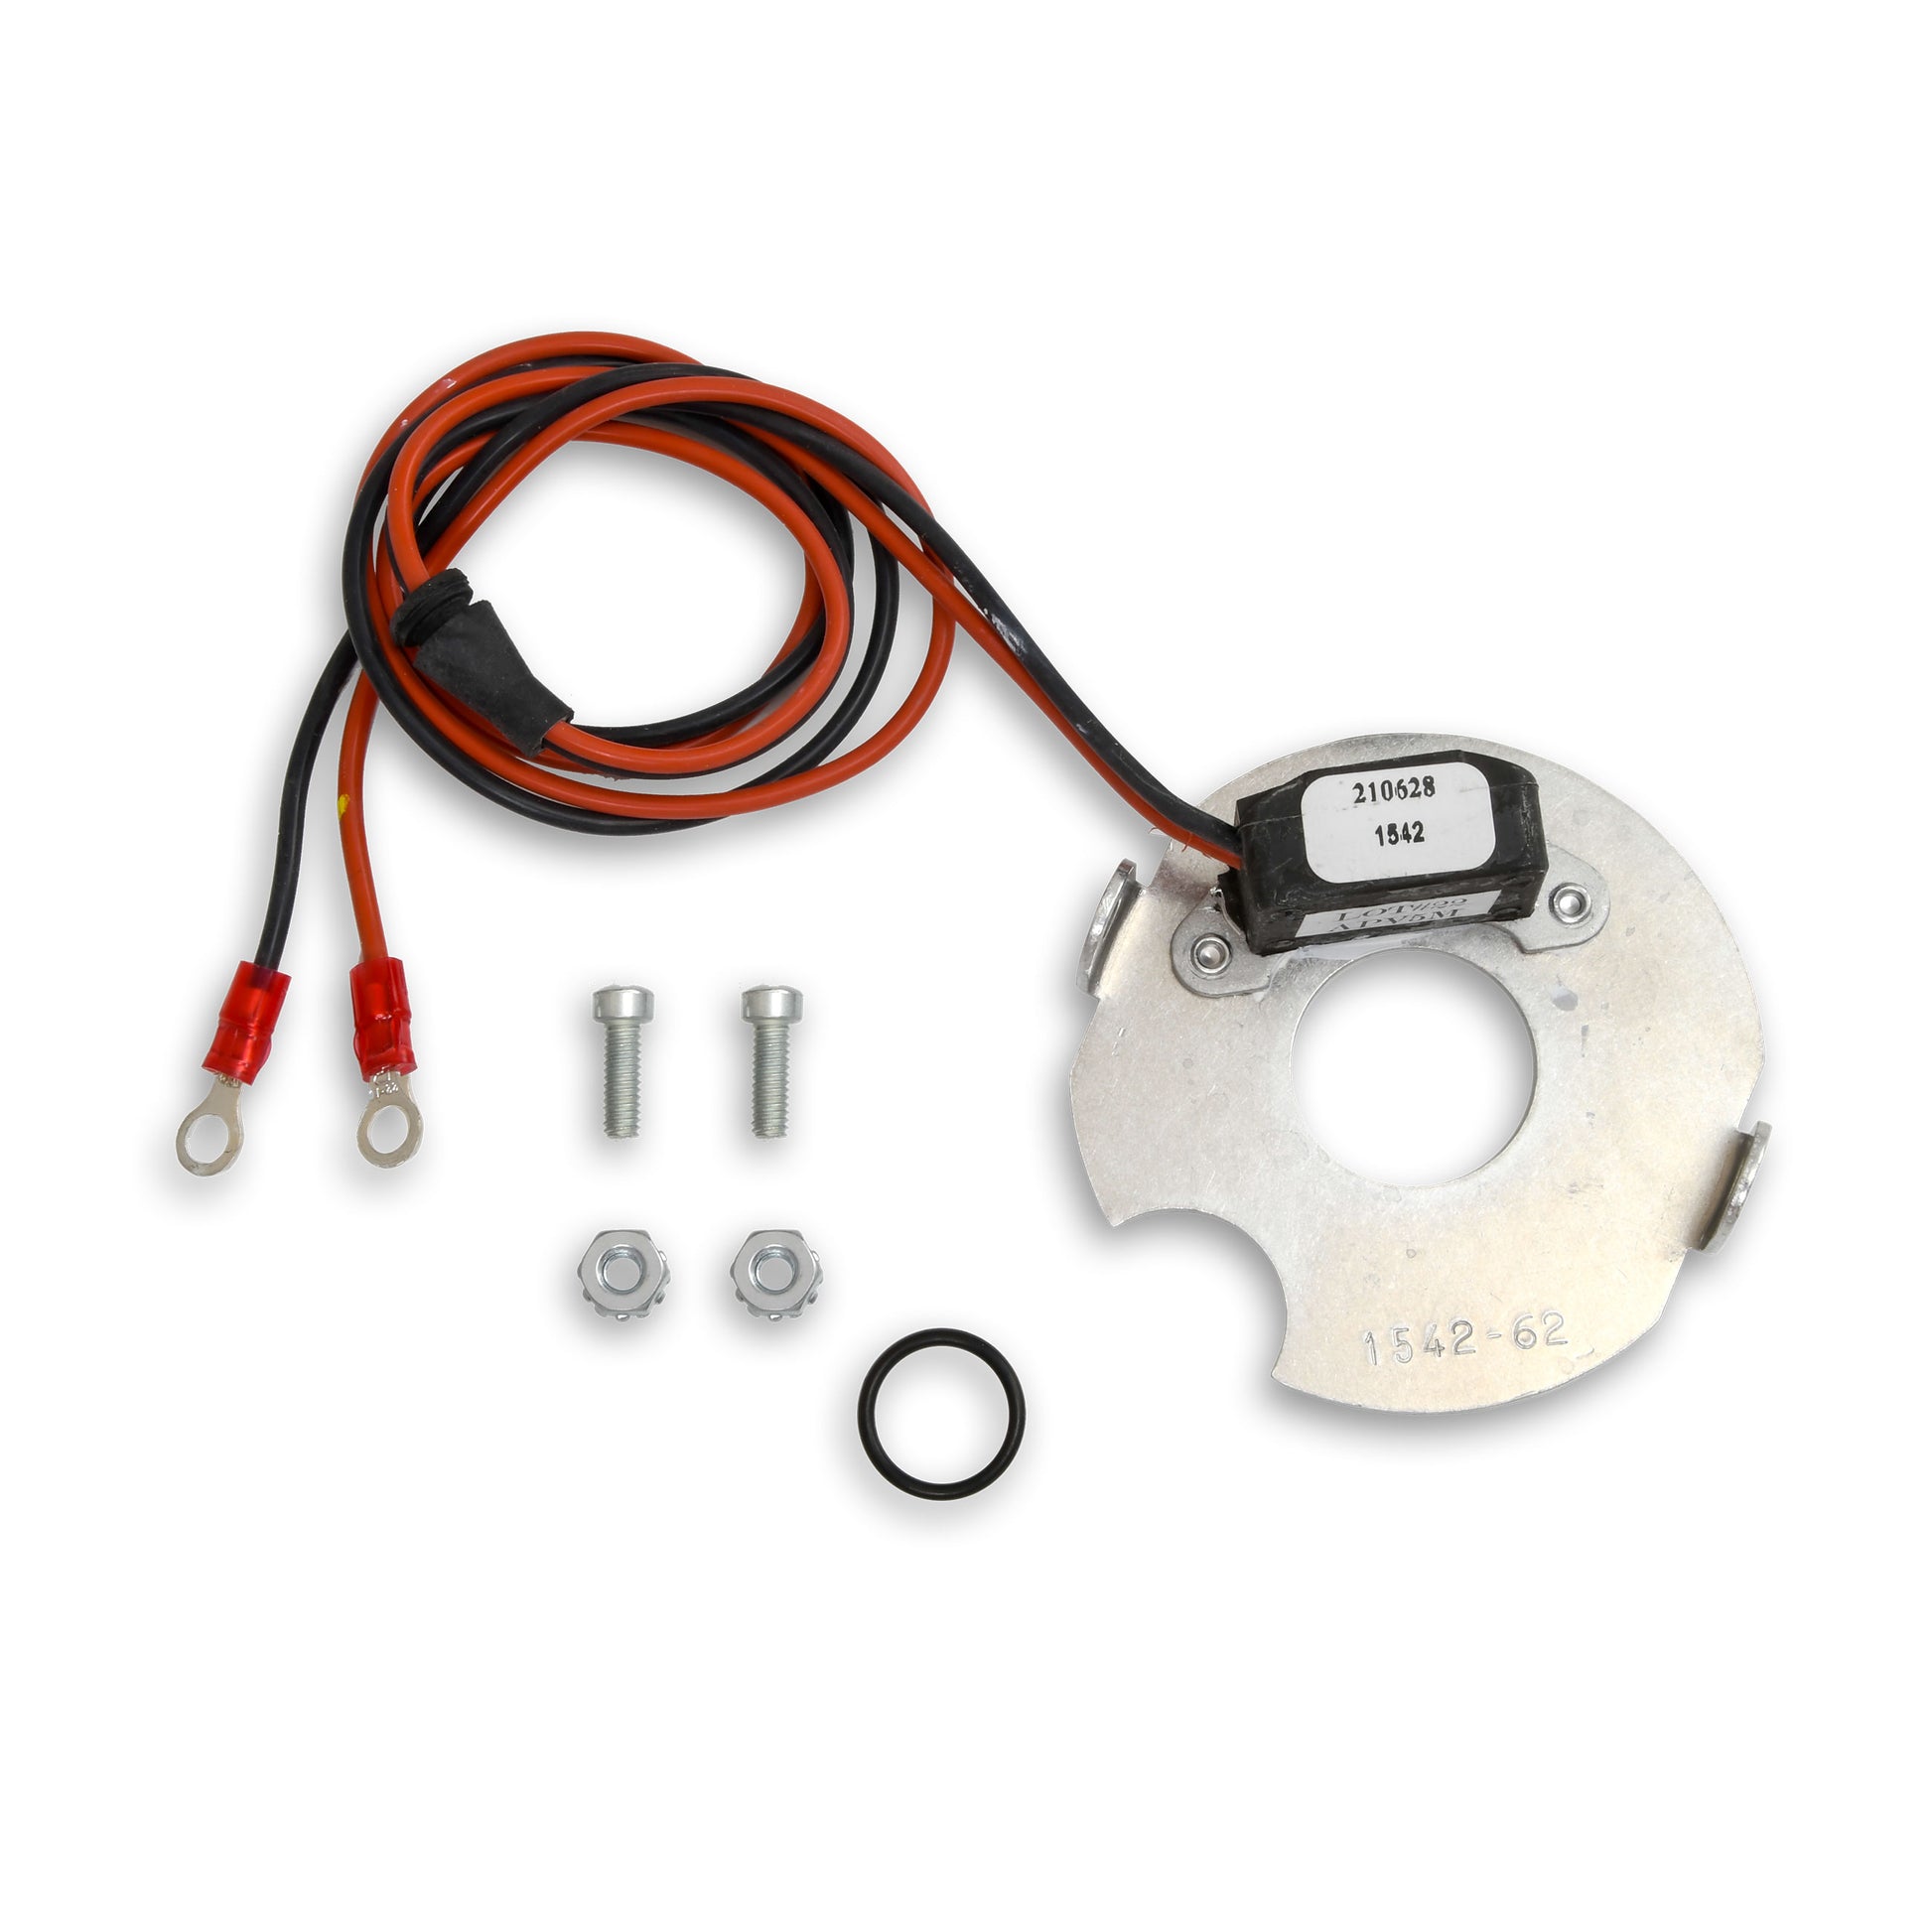 PerTronix Ignitor Electronic Ignition Conversion Kit-1542